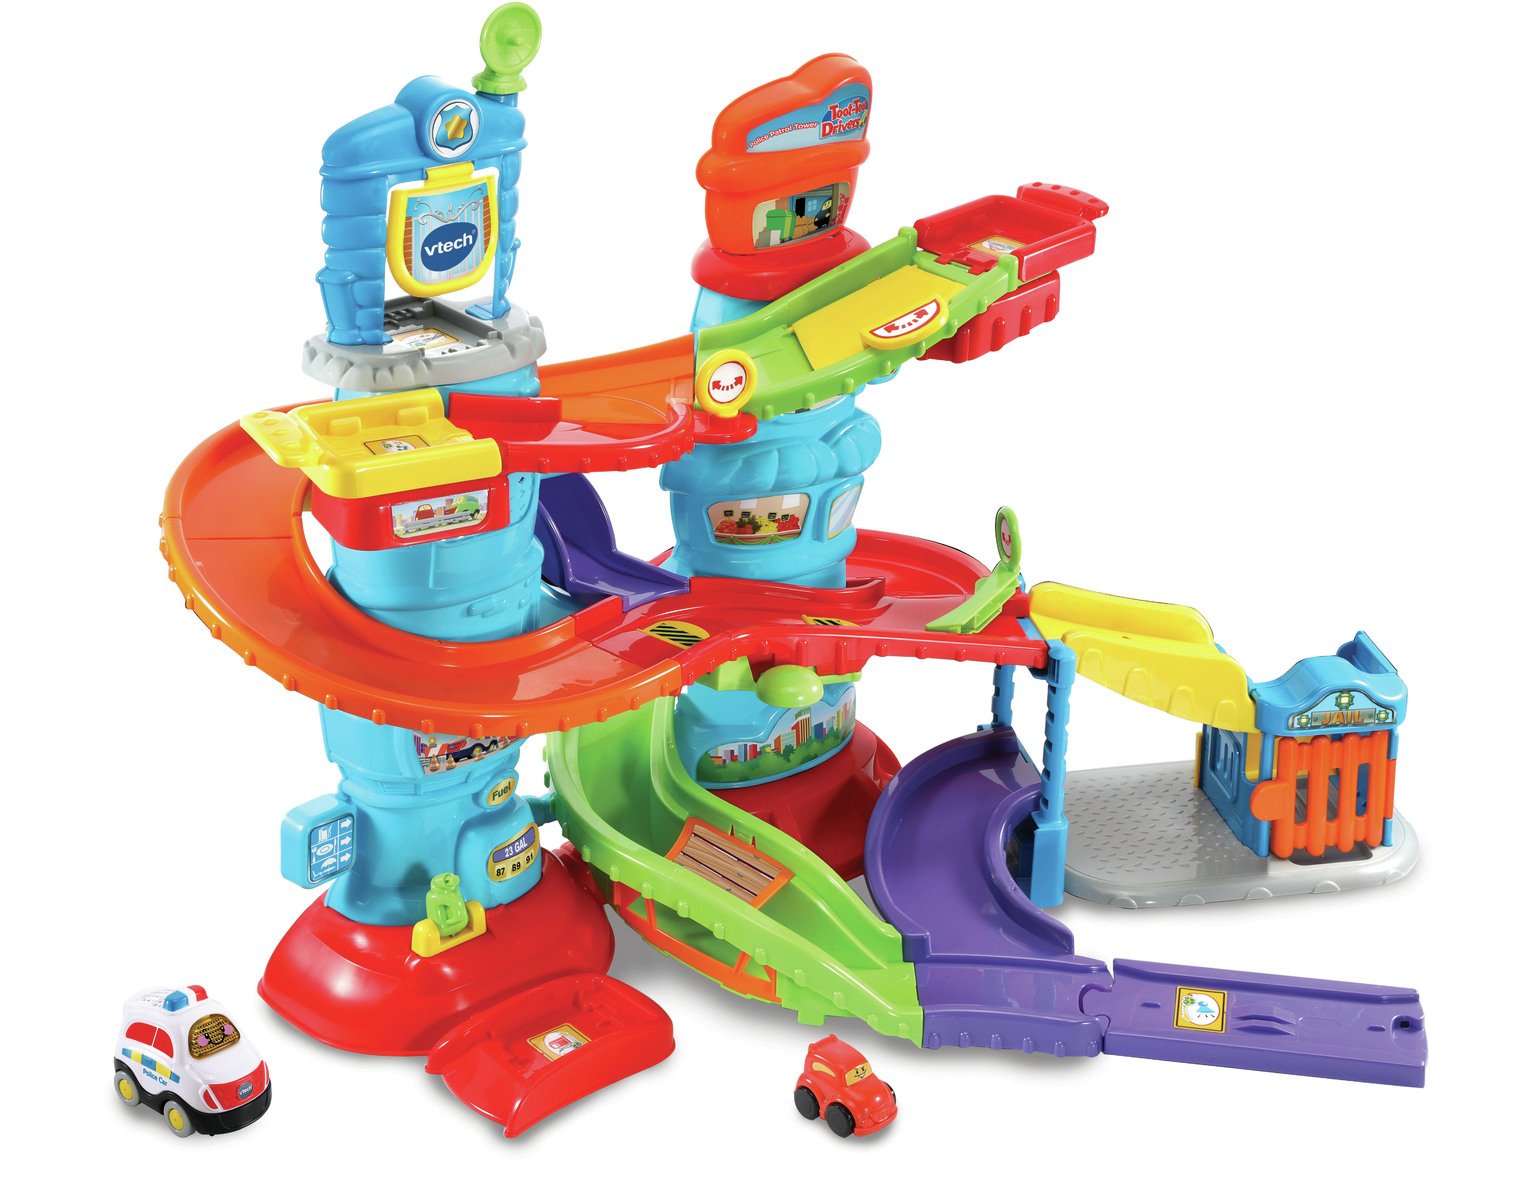 VTech Toot-Toot Drivers Patrol Tower Review